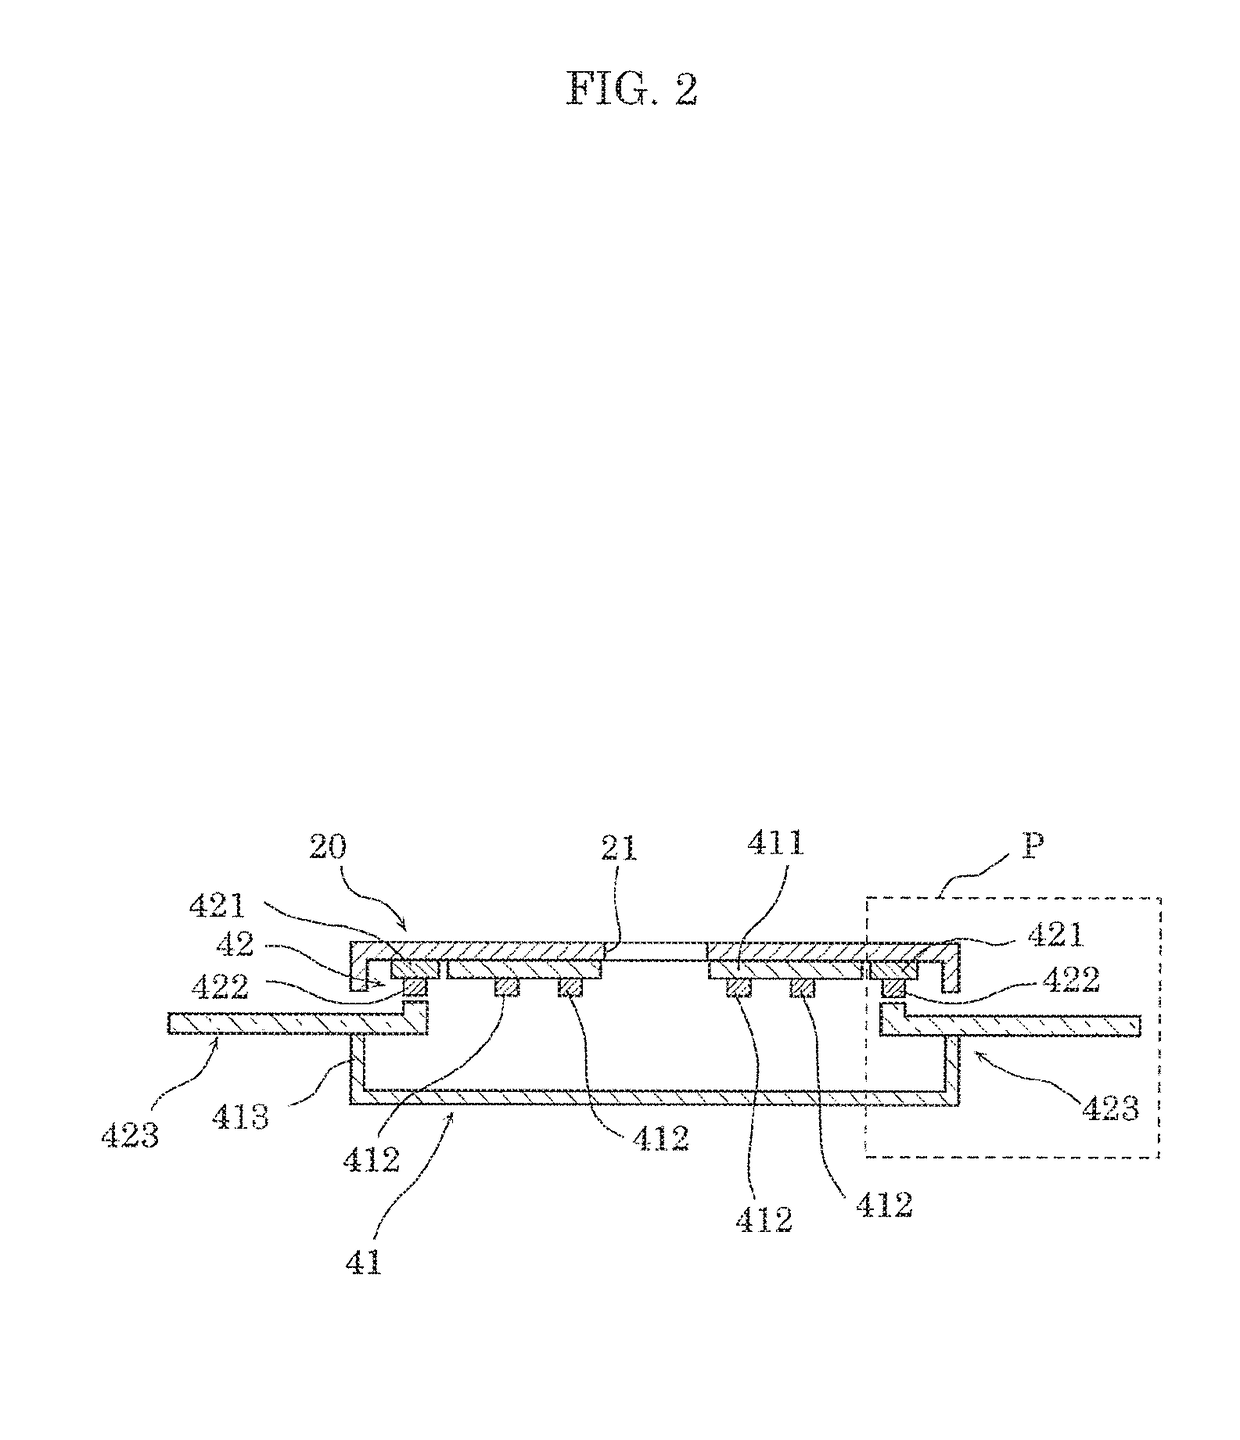 Lighting apparatus with lower color temperature lighting to a peripheral region